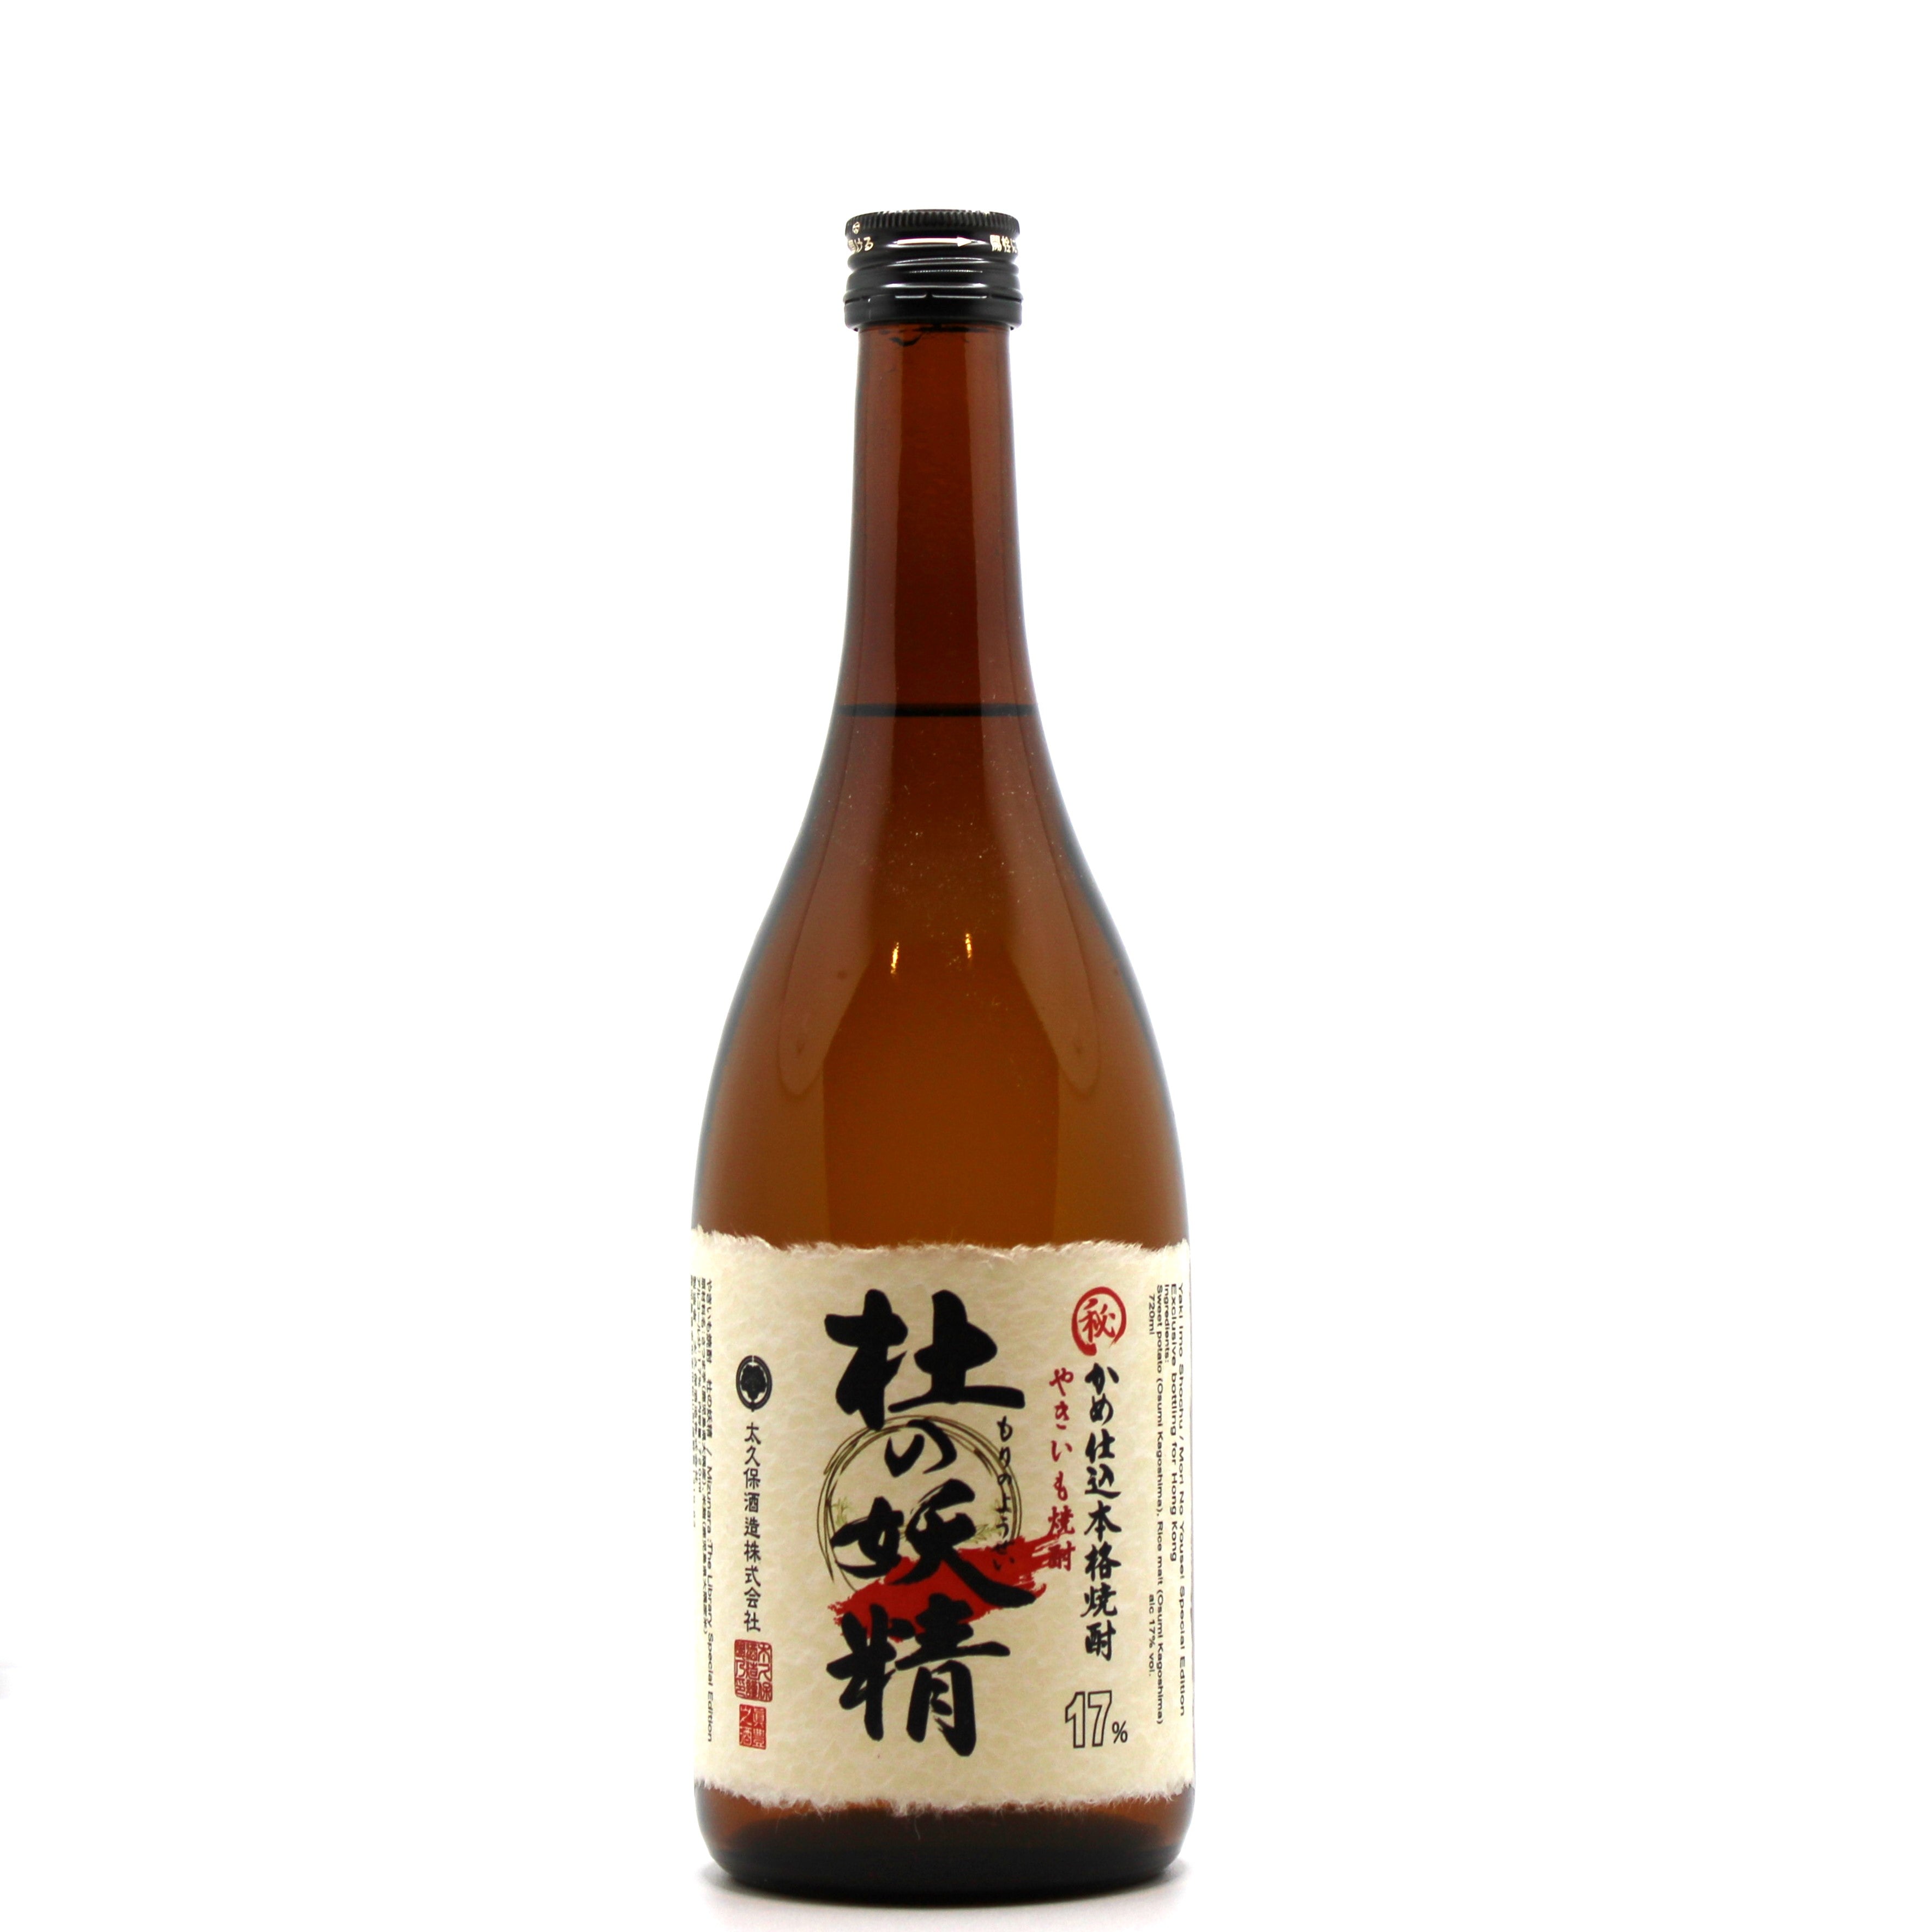 Special and Limited edition bottling for Mizunara this Yaki Imo Shochu has been bottled at a lower ABV of 17% to allow the grilled sweet potato flavours to shine through (mid to back palate) without overpowering any food being consumed alongside. 